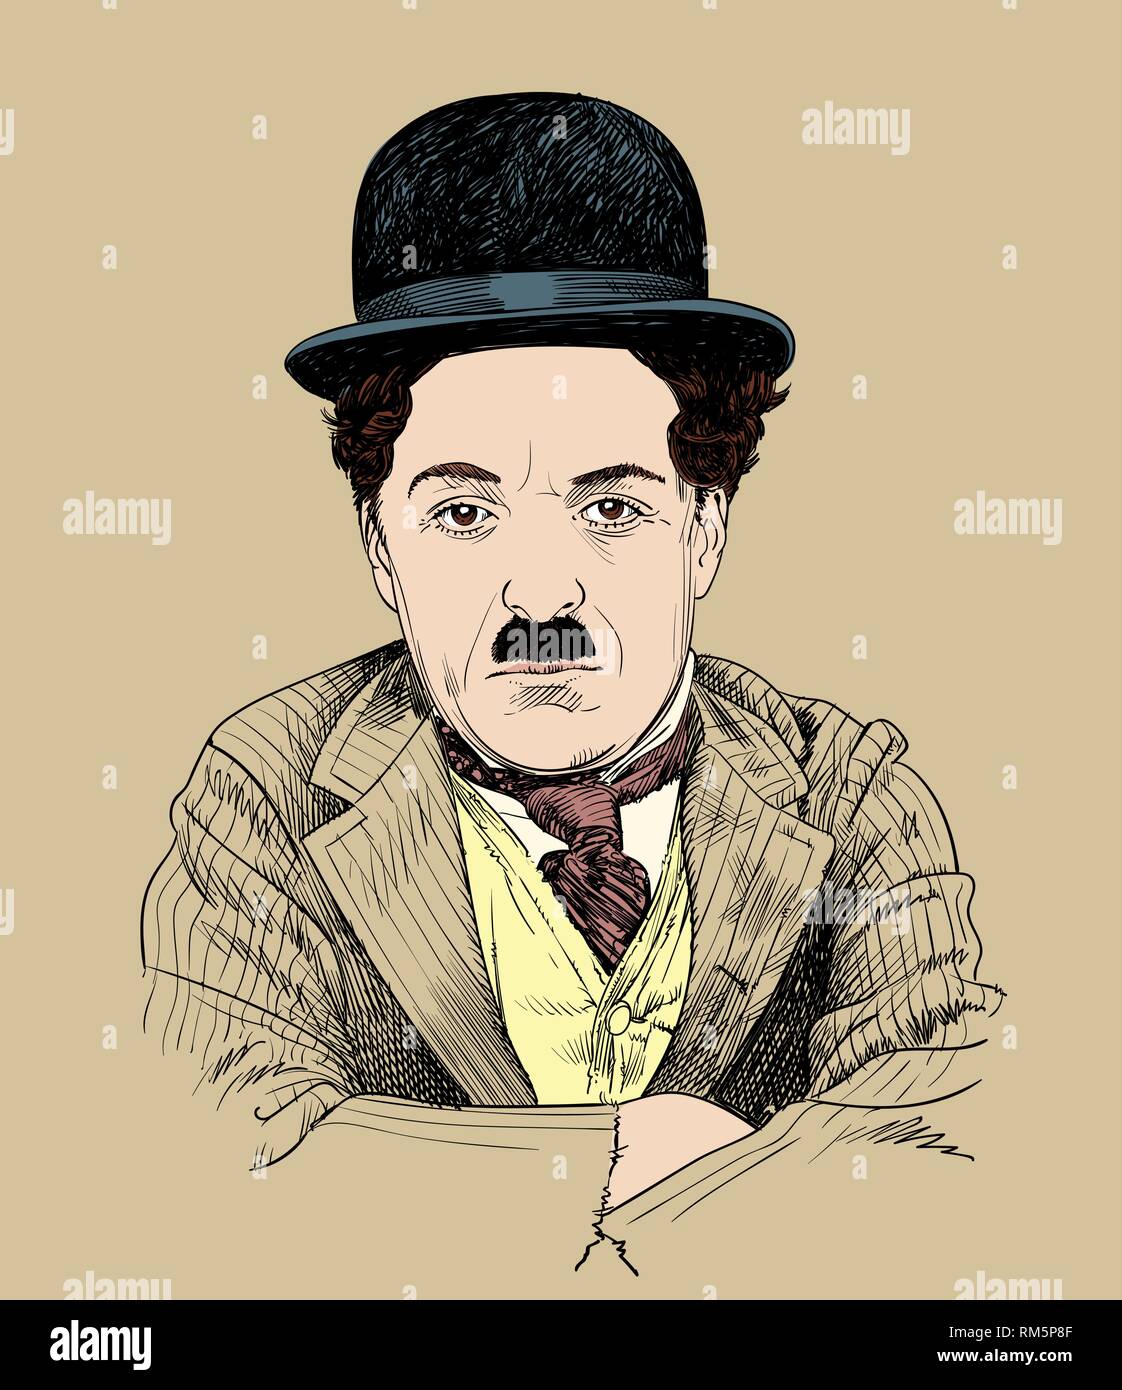 Charlie Chaplin portrait in line art illustration. He was English comic actor, movie maker and composer who rose the fame in the era of silent movie. Stock Vector